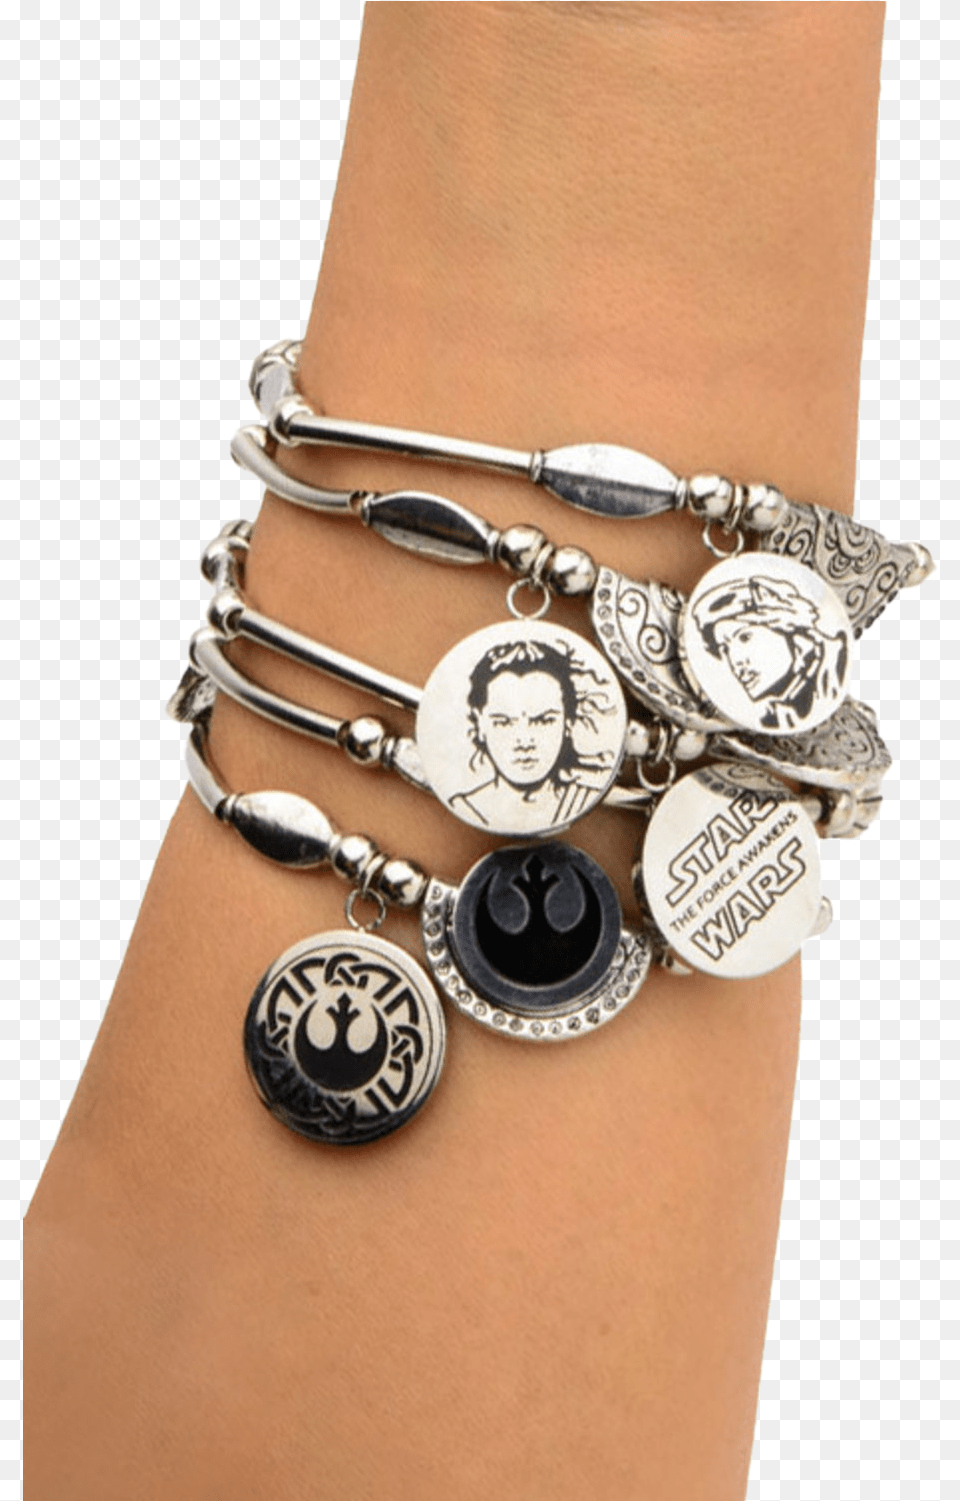 Star Wars Jewellery Episode 7 Rey Stainless Steel Charm Bracelet, Accessories, Jewelry, Necklace, Face Free Transparent Png